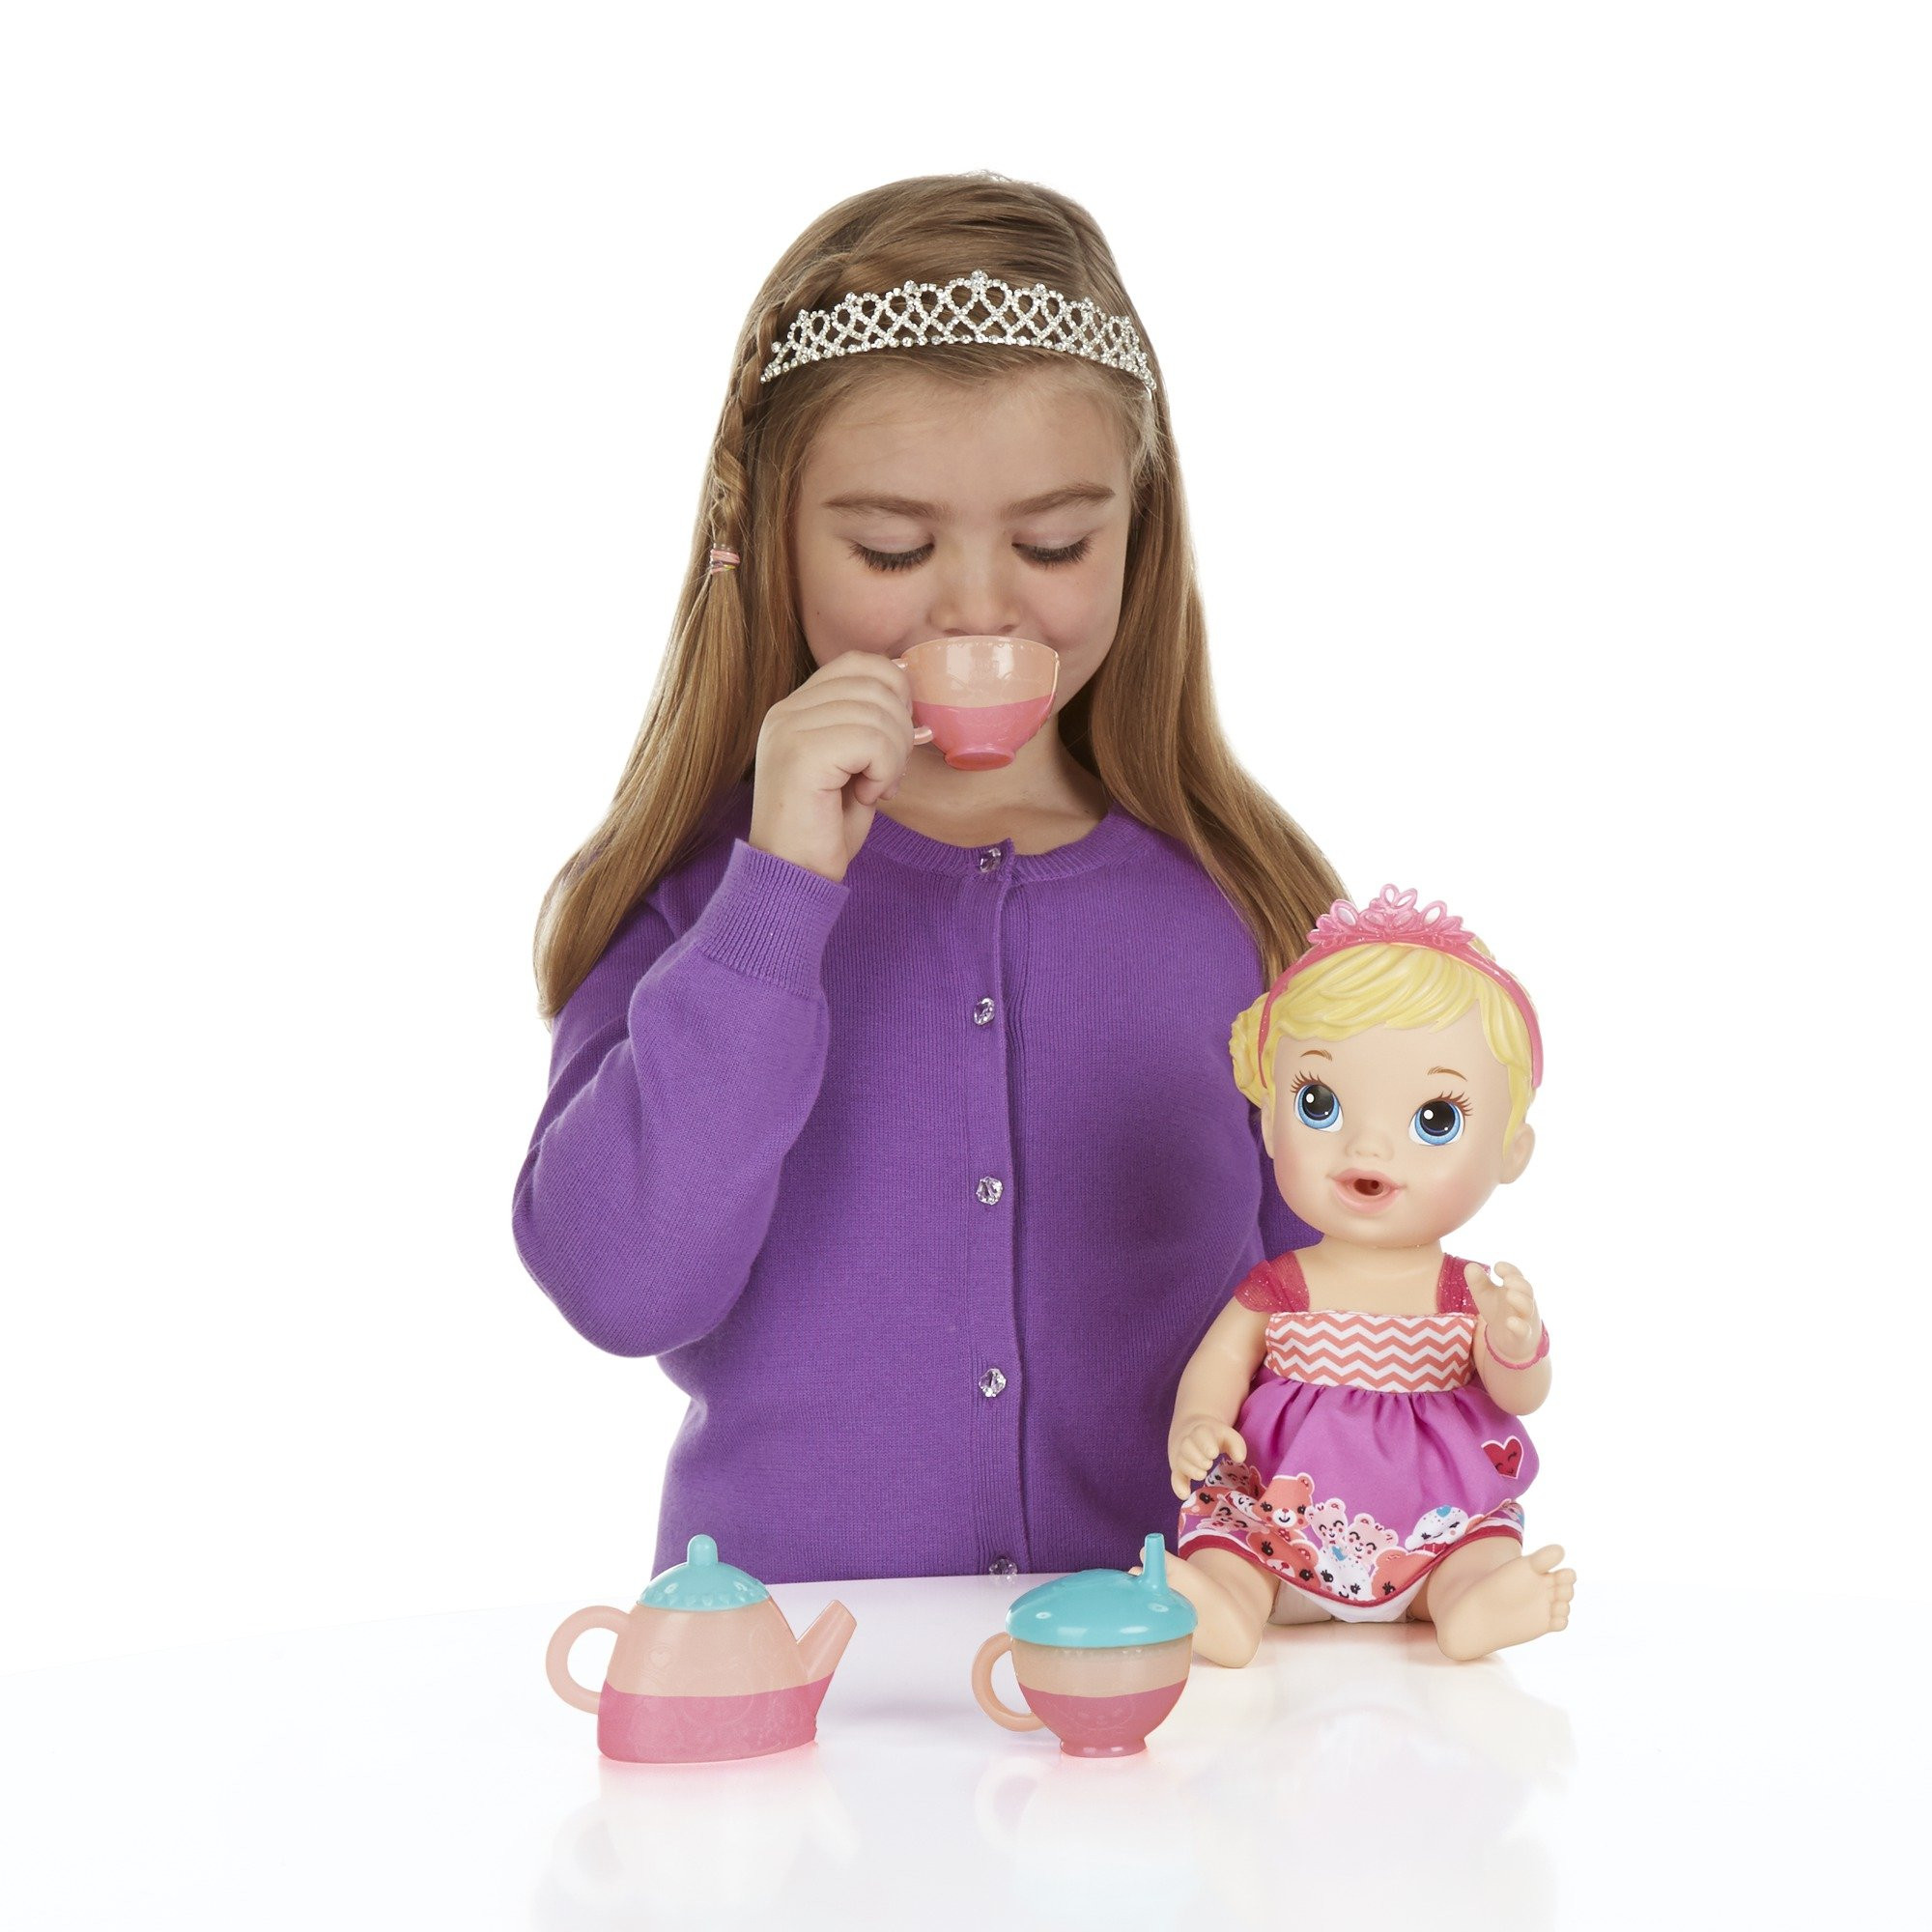 Baby Alive Tea Party Doll
 Baby Alive Lil Sips Baby Has a Tea Party Doll Blonde